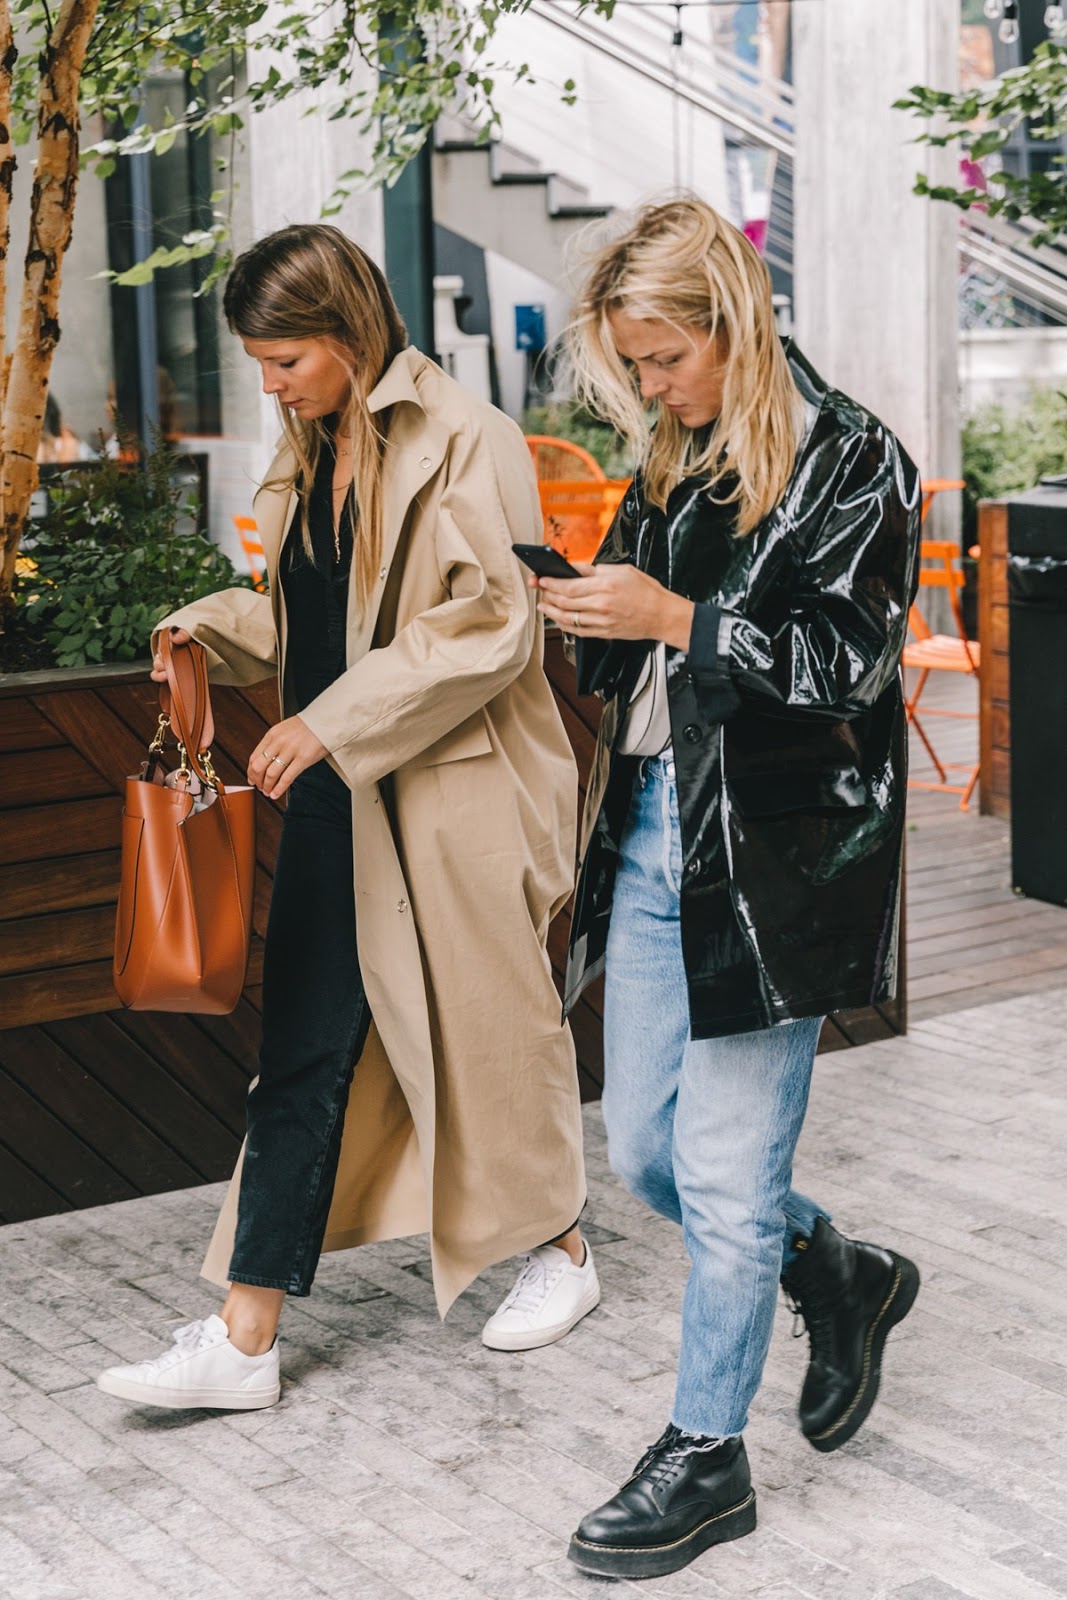 The Best Fall and Winter Items From the Shopbop Sale